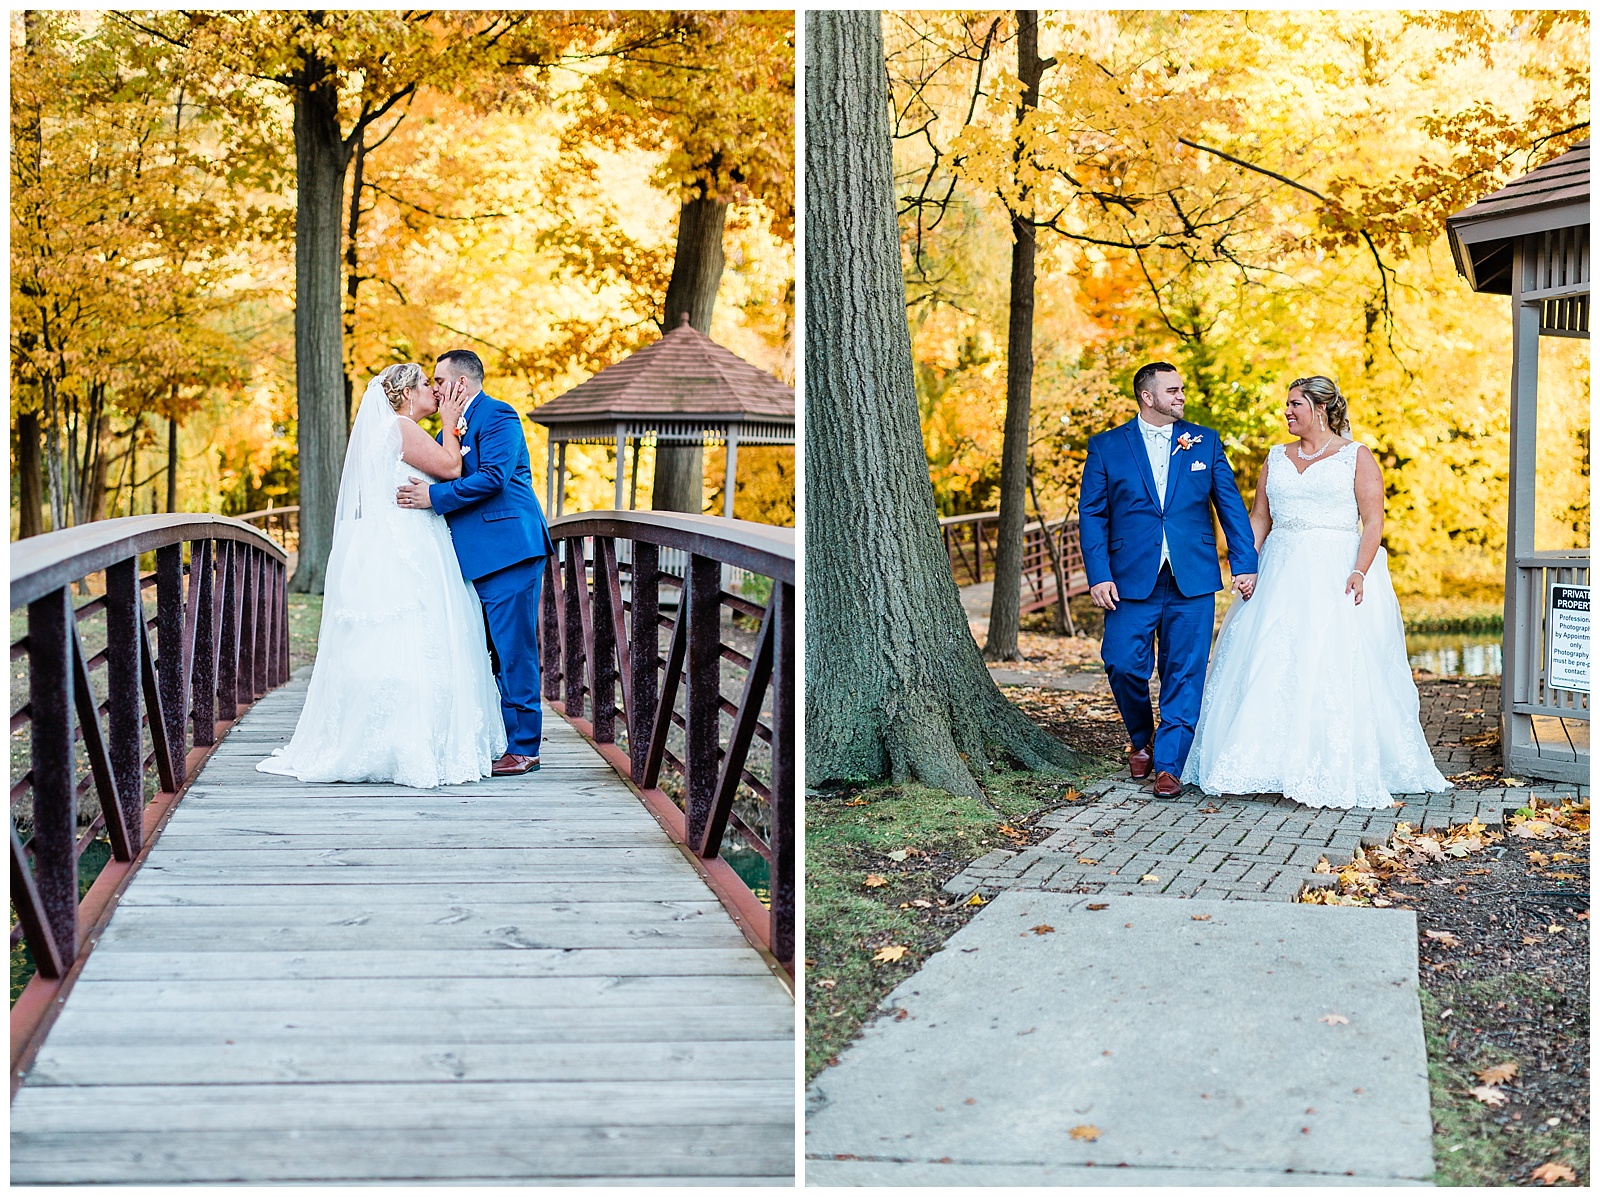 Bride and groom portraits from a Fairlane Club Fall Wedding.